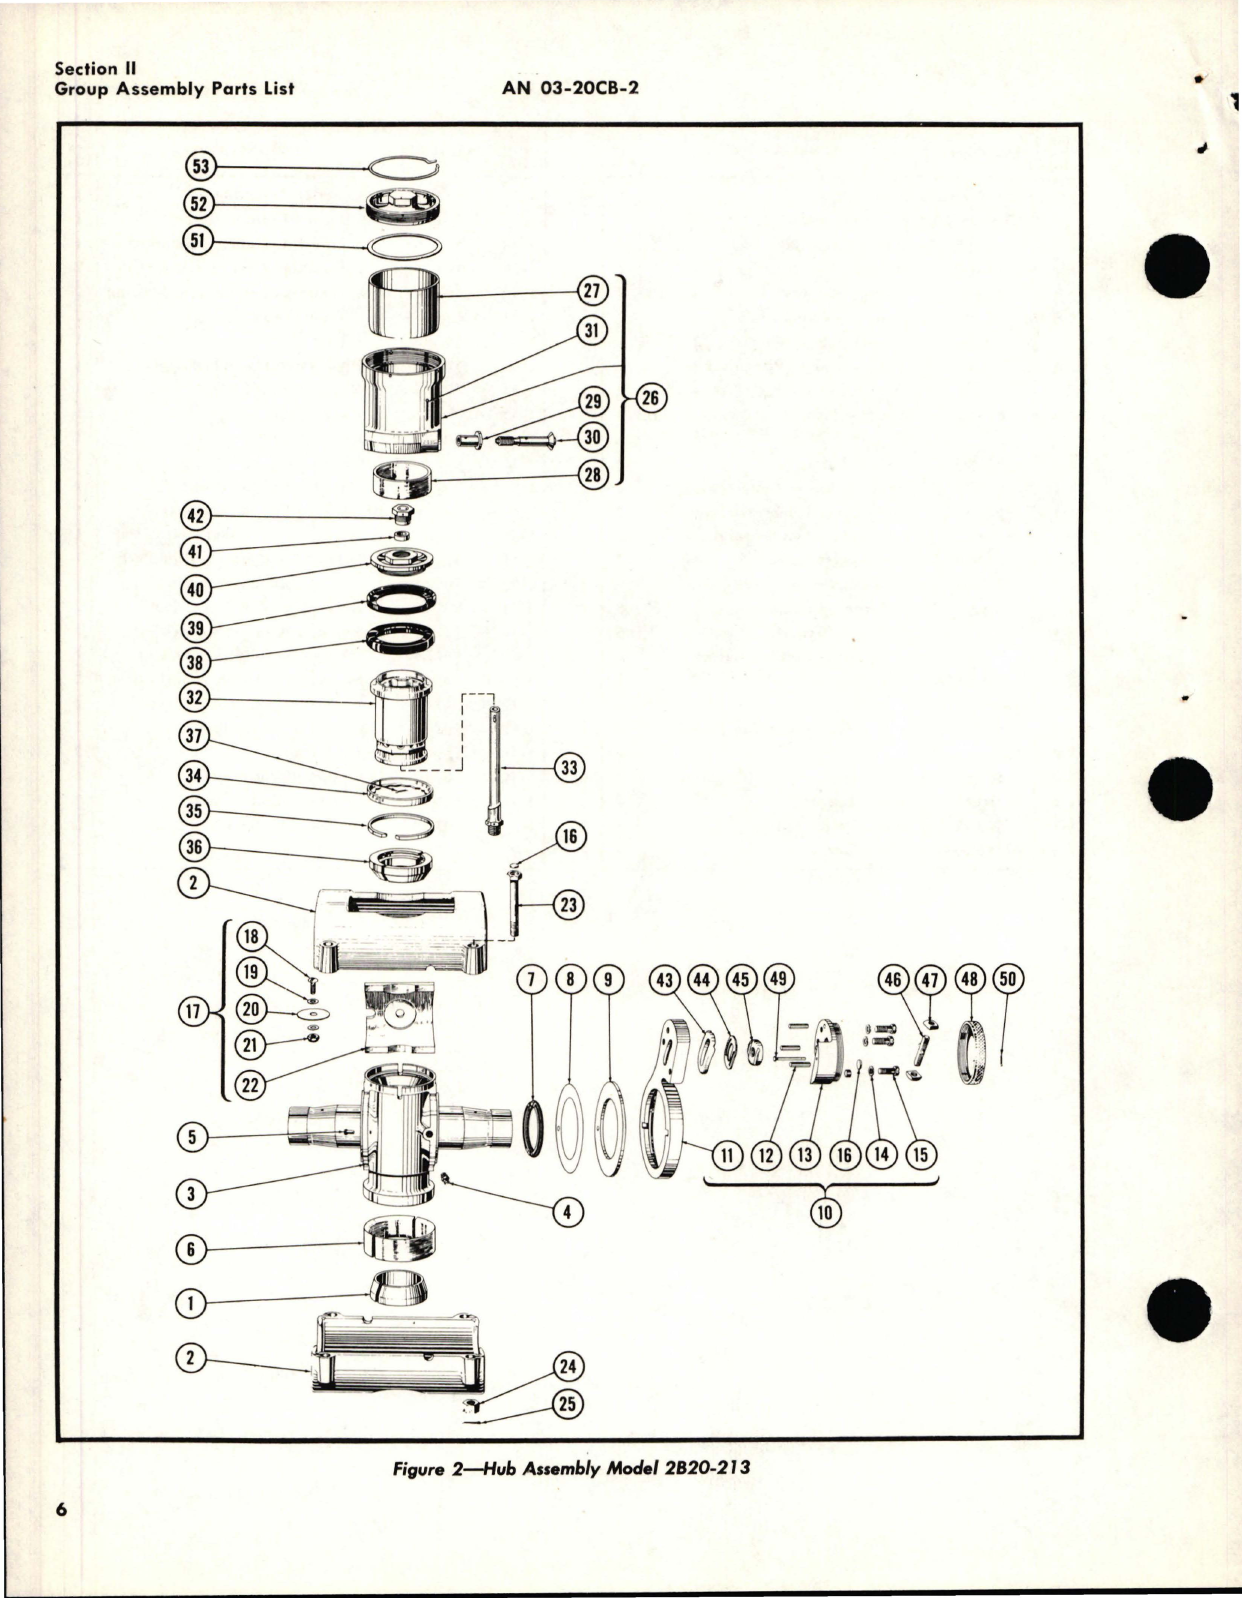 Sample page 8 from AirCorps Library document: Parts Catalog for Counterweight Propellers - Hub Models 2B20, 2D30, 2E40, 3D40, 3E50, and 12D40